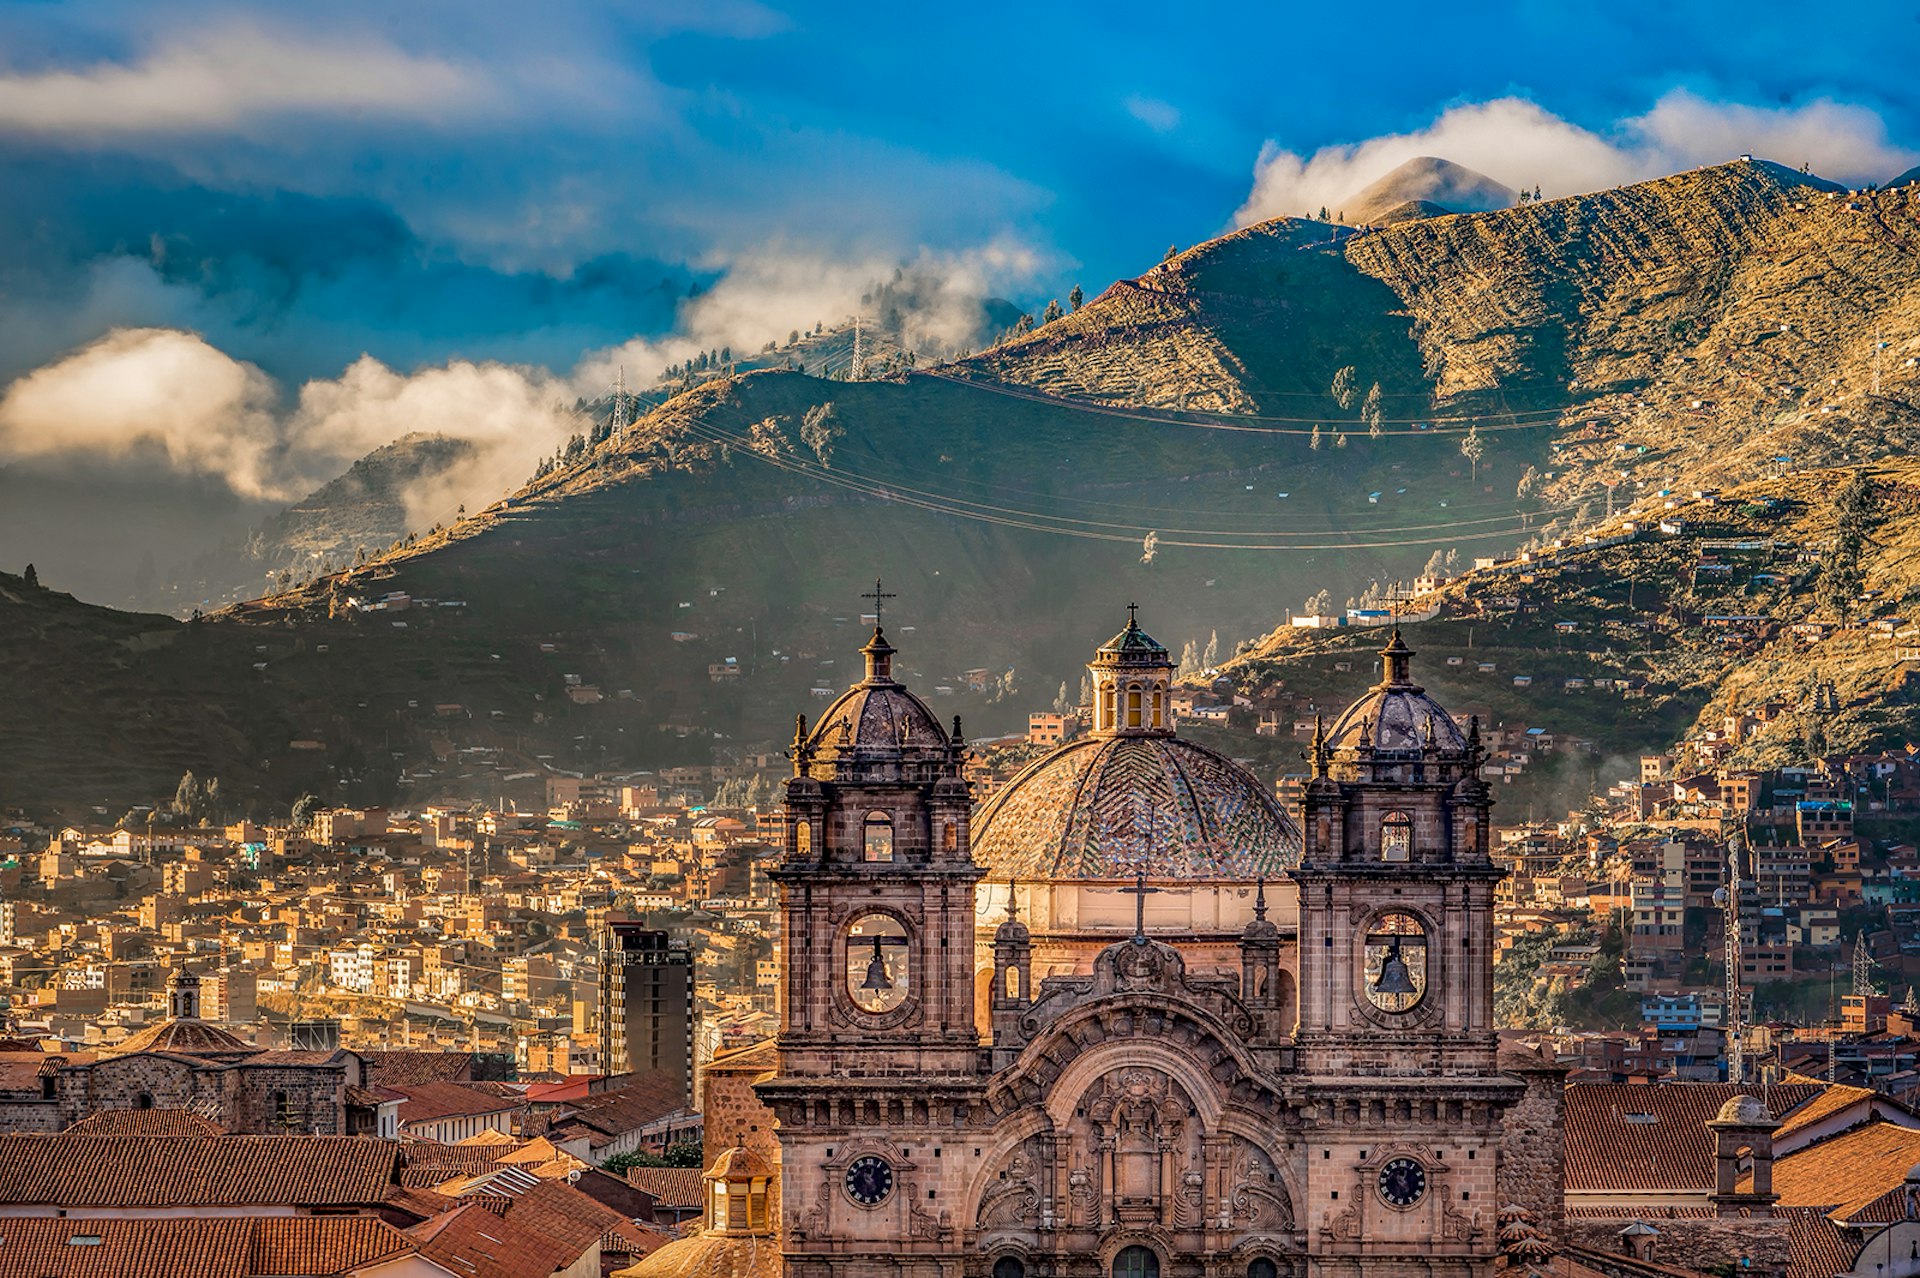 An aerial view of Cuzco with the cathedral bell towers in the foreground